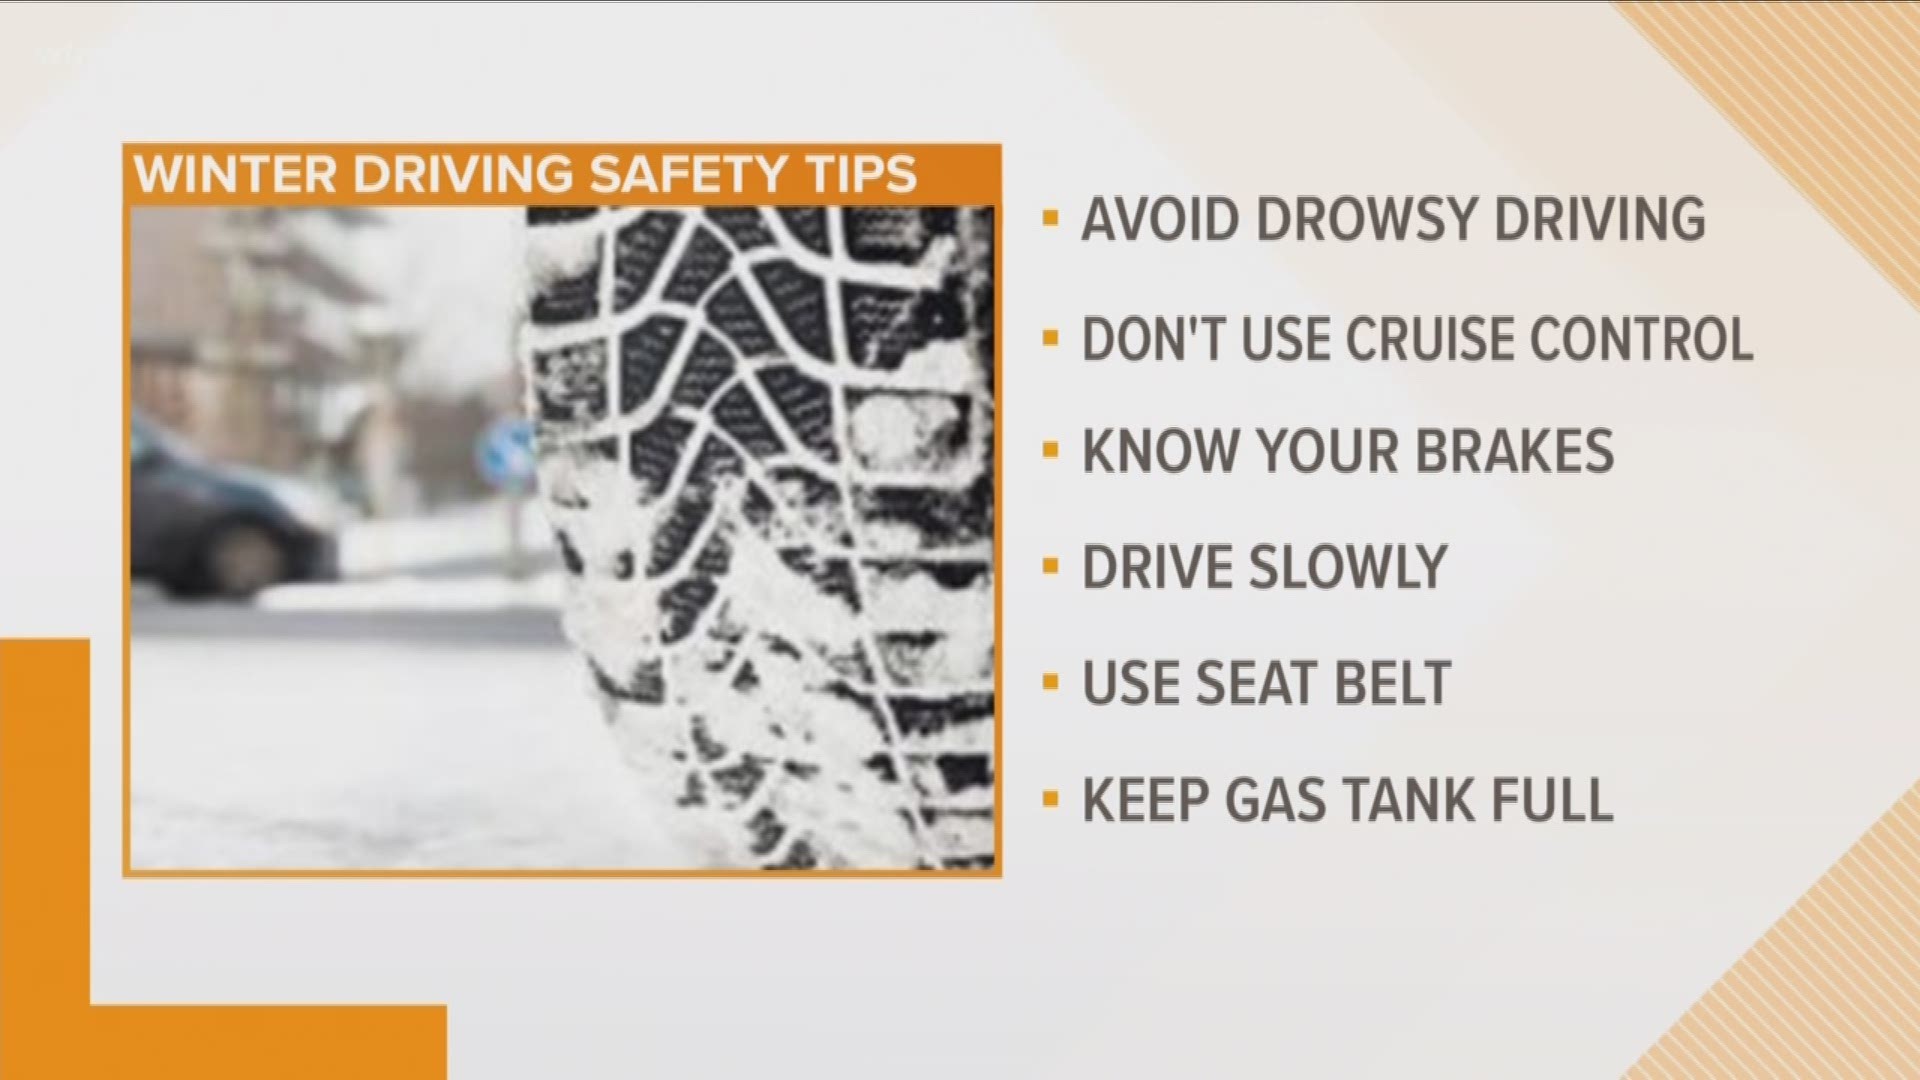 Over 1,300 people are killed in vehicle crashes on snowy, slushy, or icy pavement annually.